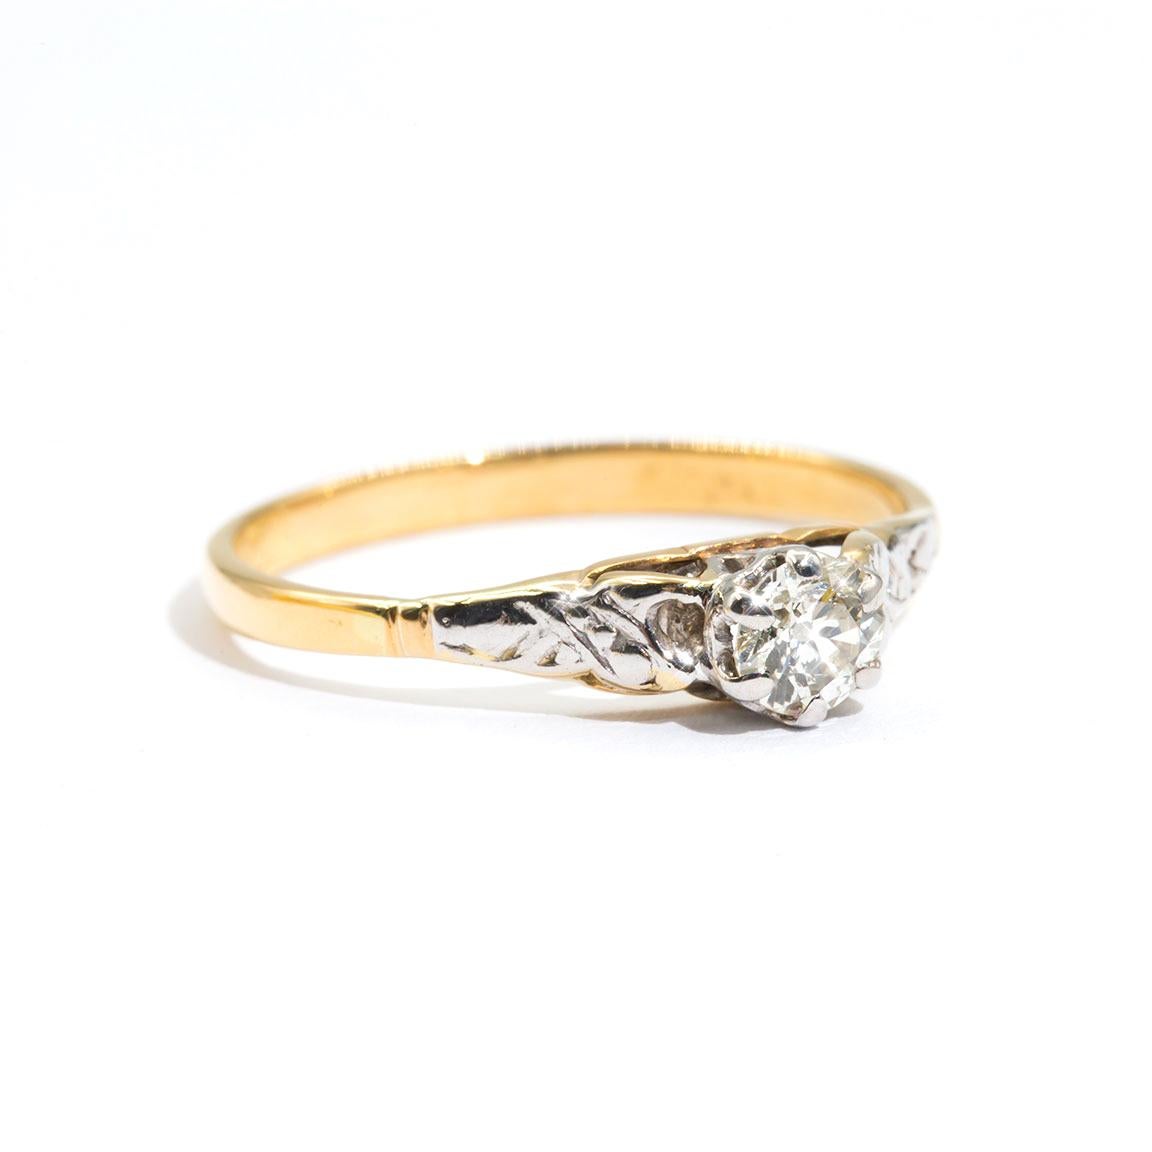 Lovingly crafted in 18 carat yellow gold is this charming vintage solitaire engagement ring that features a sparkling white diamond. We have named this vintage splendour The Rebekah Ring. The Rebekah Ring is a darling ring that is embodies romance